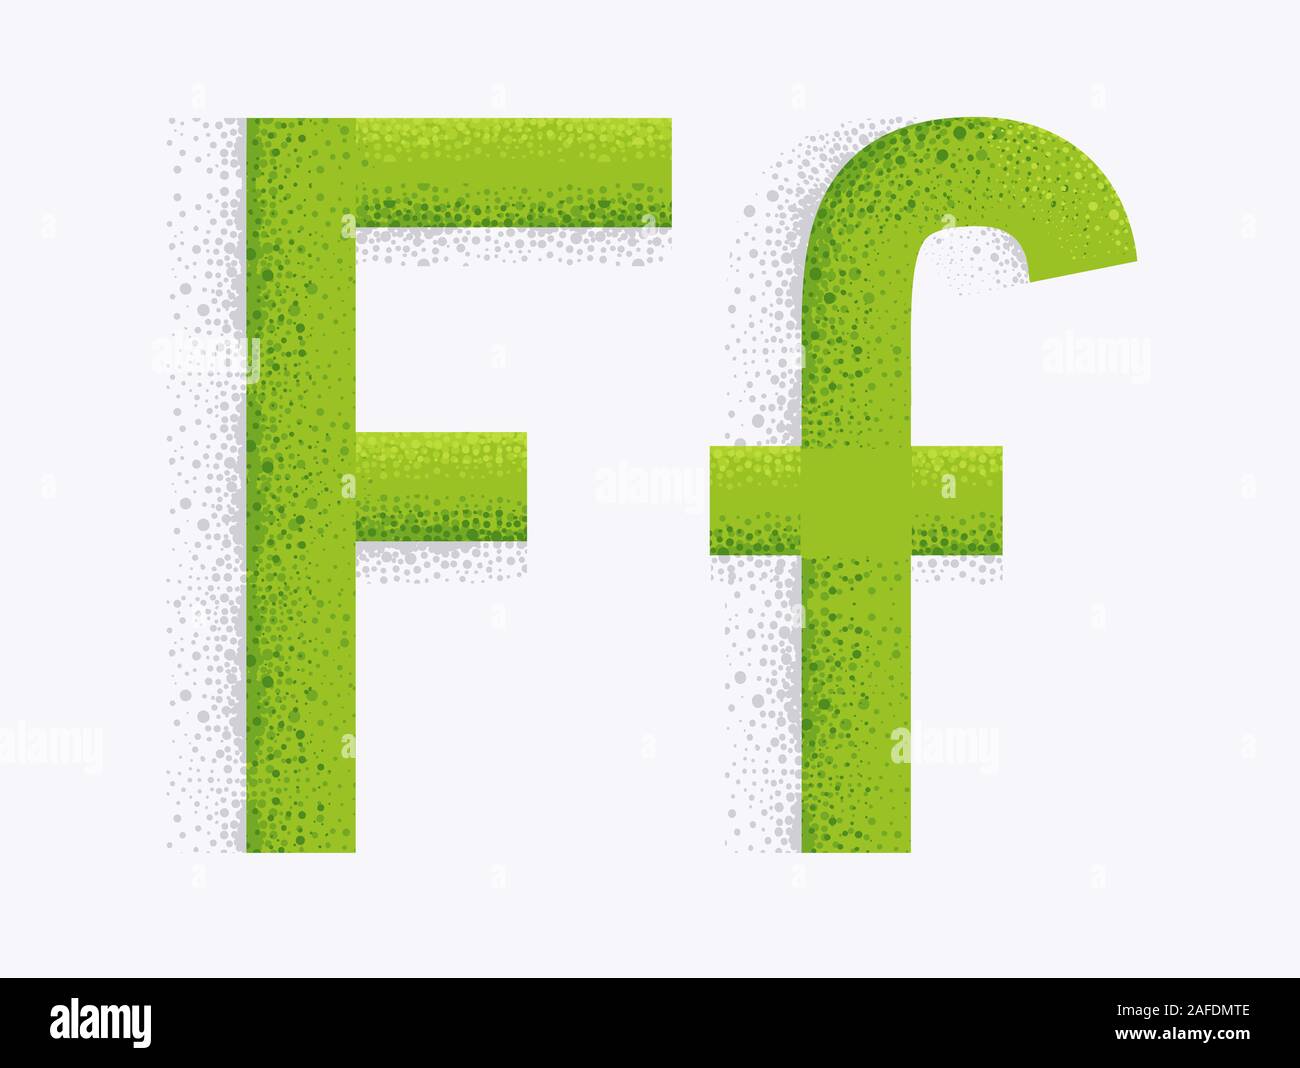 Illustration of Decorative Alphabet with Capital and Small Letter F and Dust Particle Effect Stock Photo